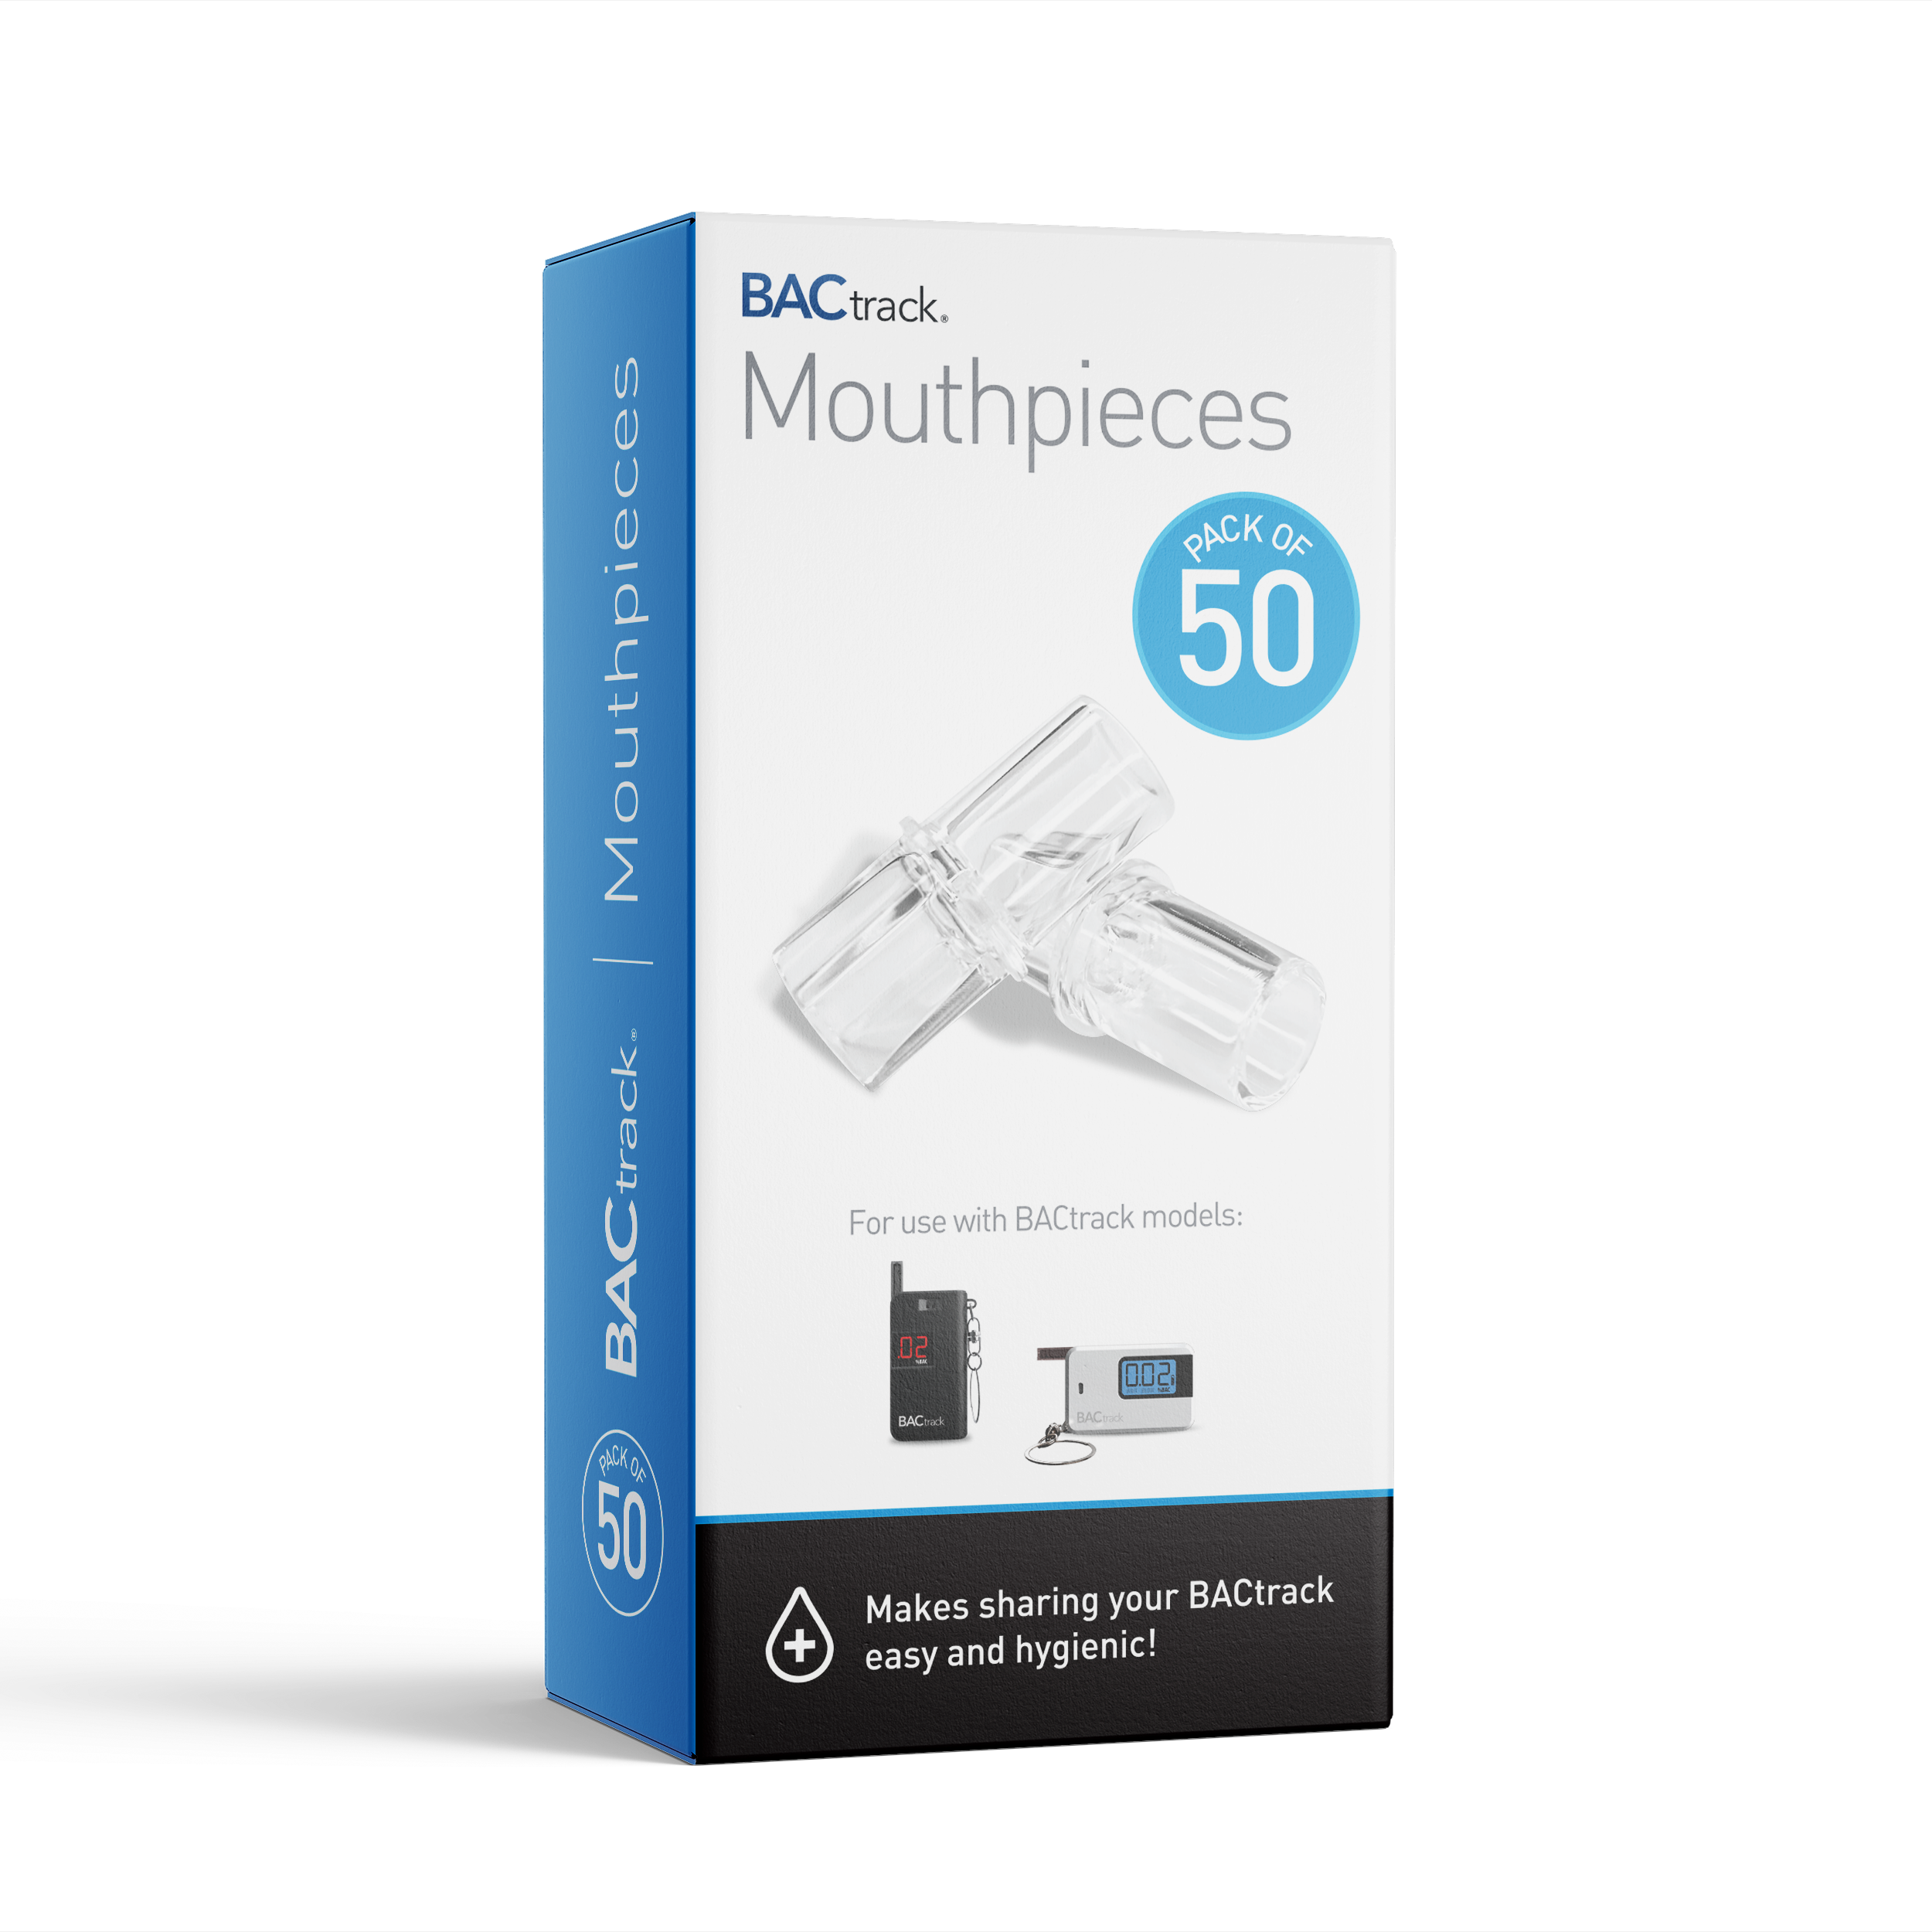 BACtrack Keychain Breathalyzer Mouthpieces - 50 Pack